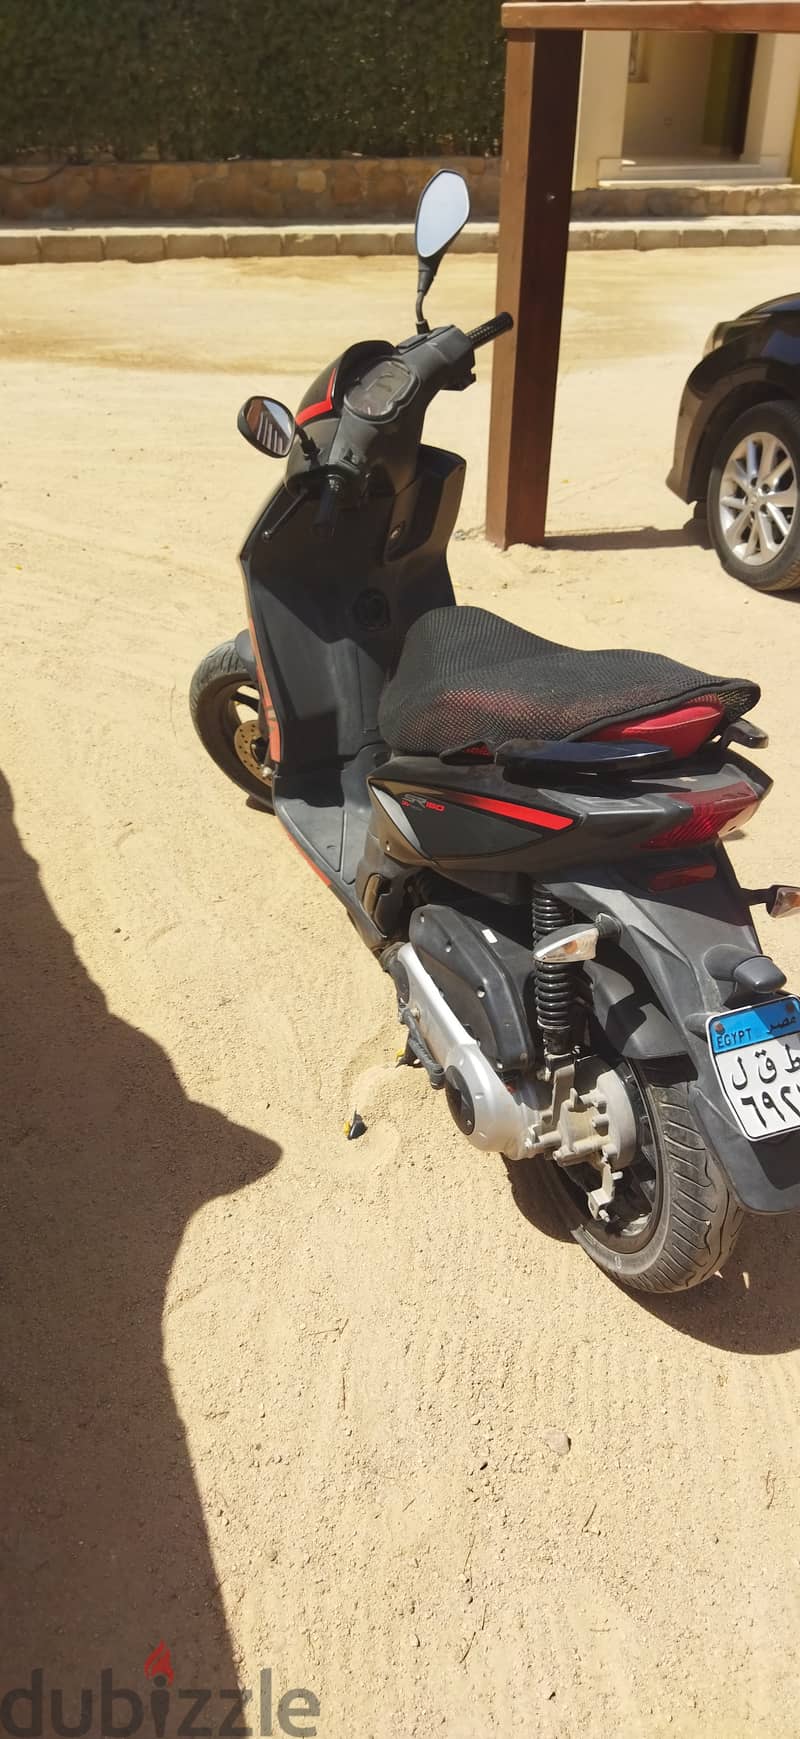 Aprilia SR 150 only 4249km (four Thousand two hundred and forty nine) 1